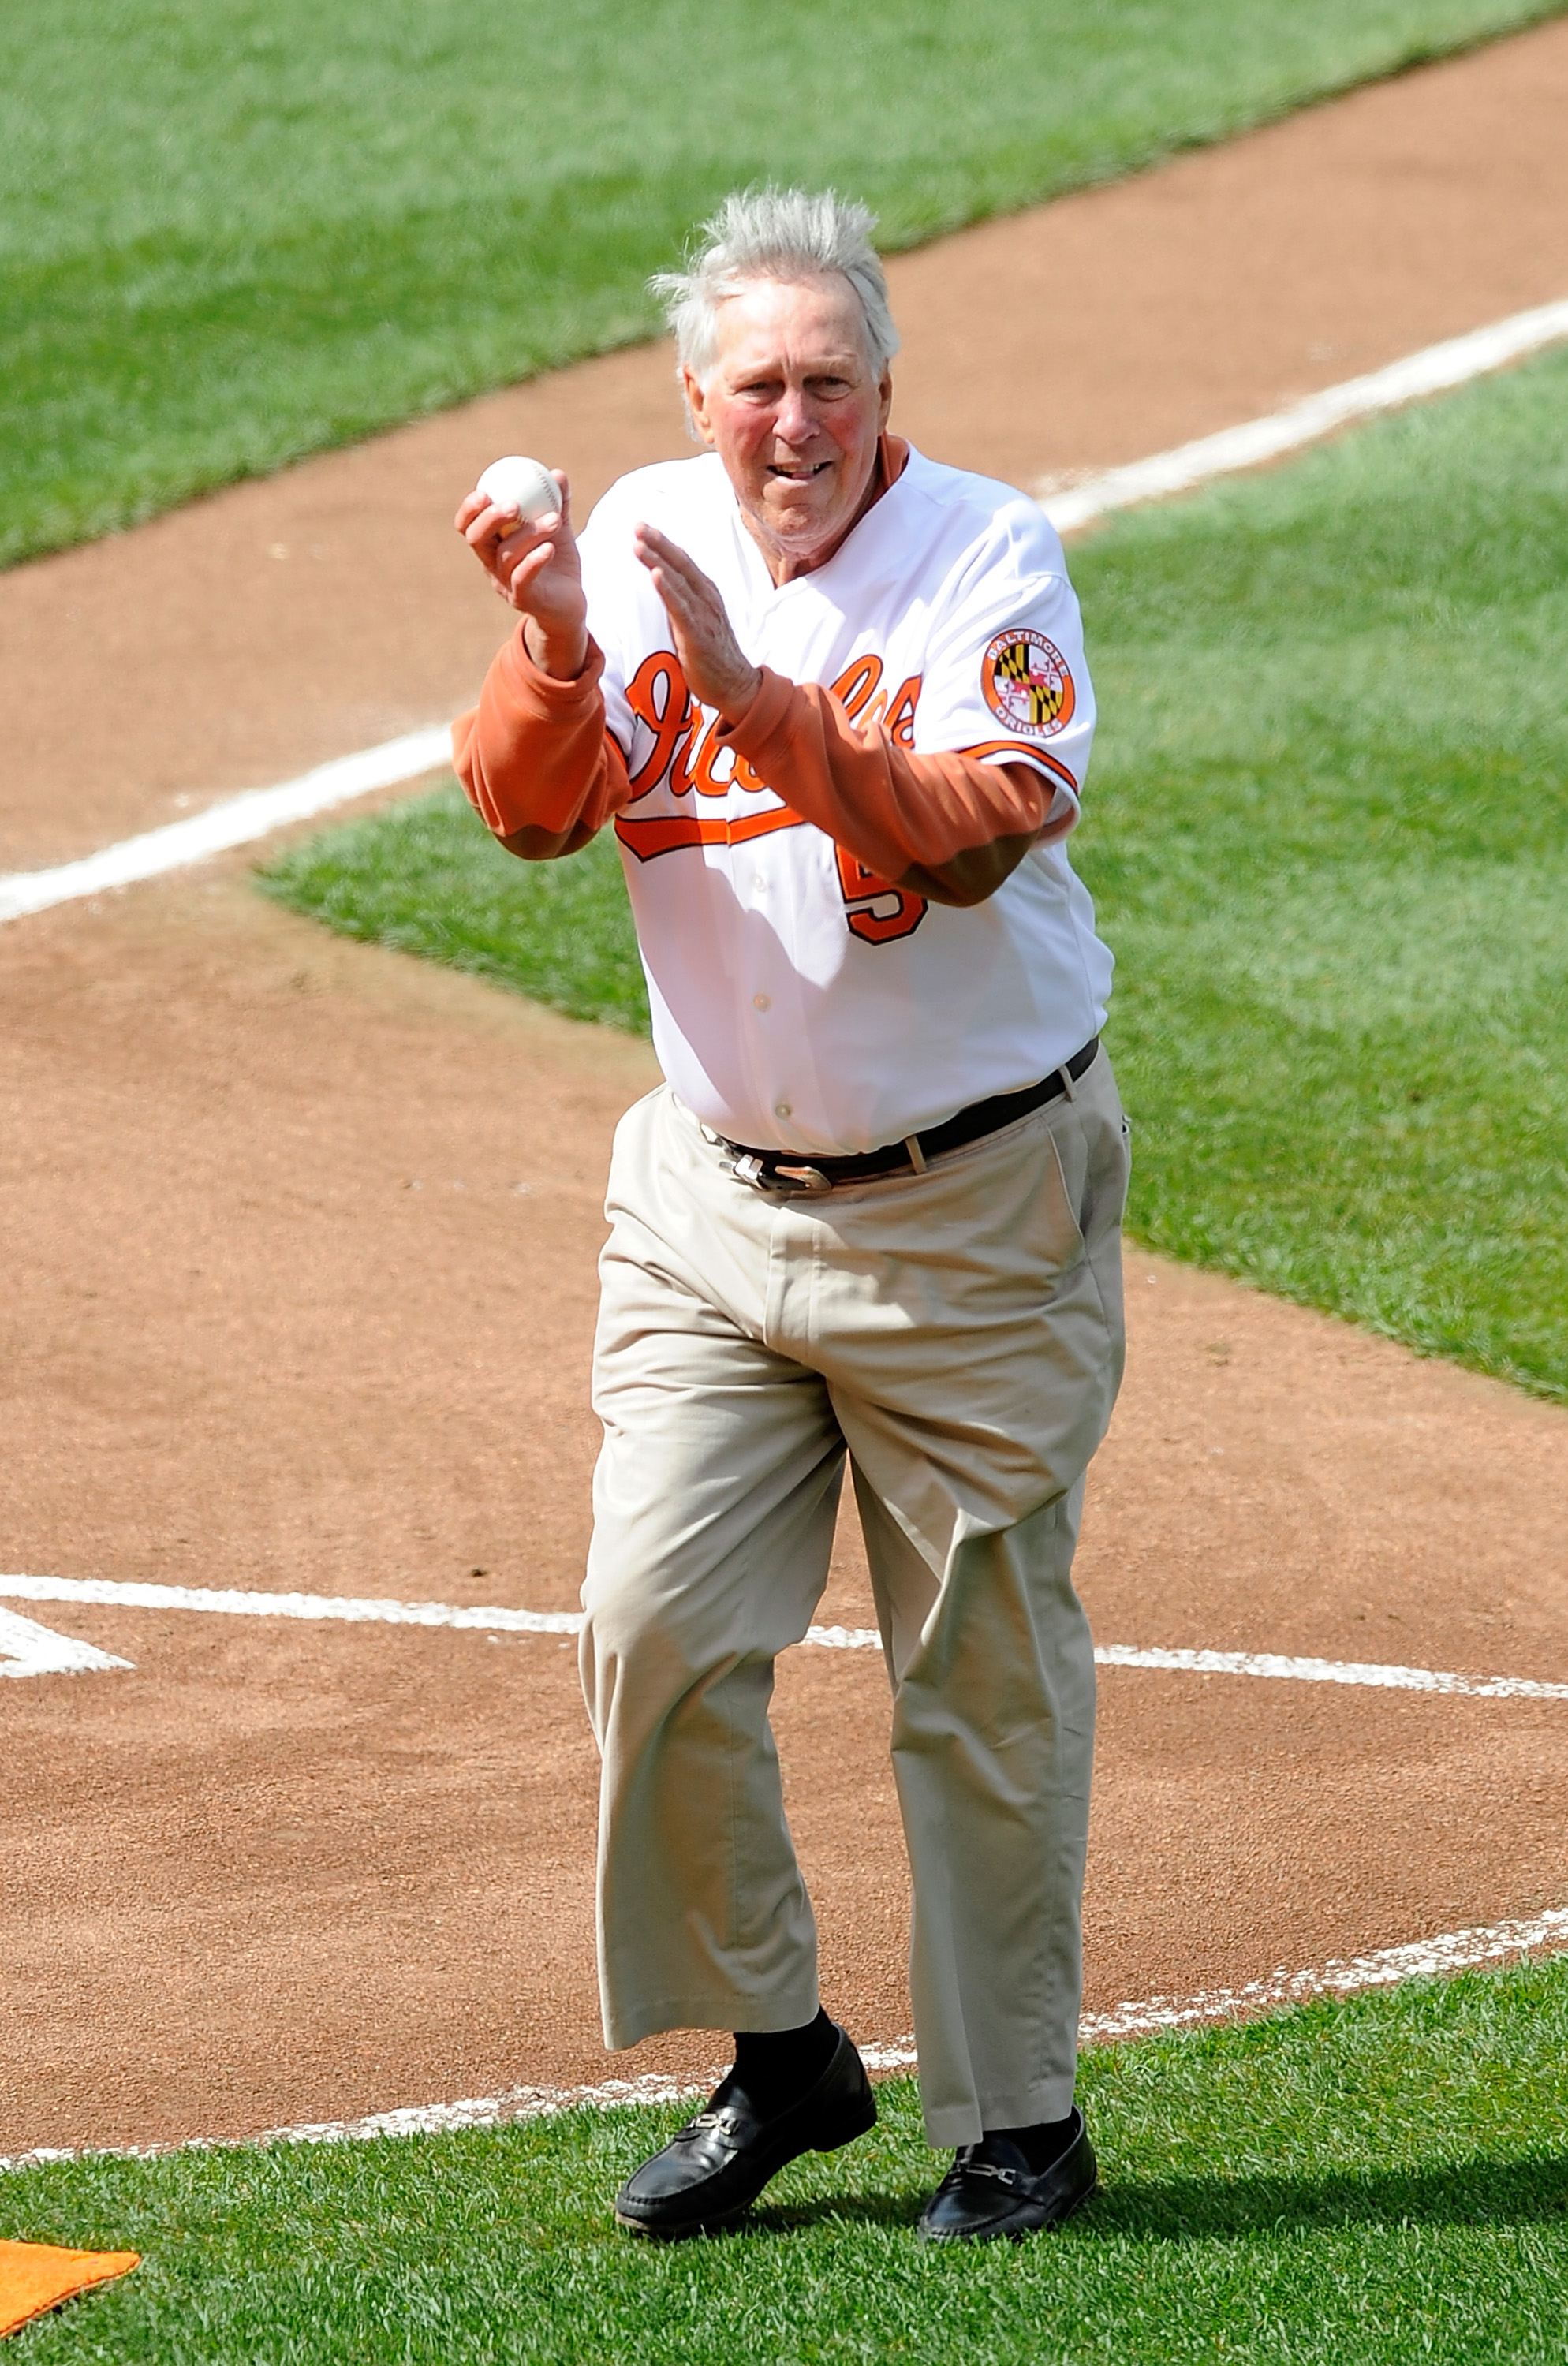 BALTIMORE - APRIL 09:  Brooks Robinson waves to the crowd after throwing out the first pitch before the game between the Baltimore Orioles and the Toronto Blue Jays on Opening Day at Camden Yards on April 9, 2010 in Baltimore, Maryland.  (Photo by Greg Fi